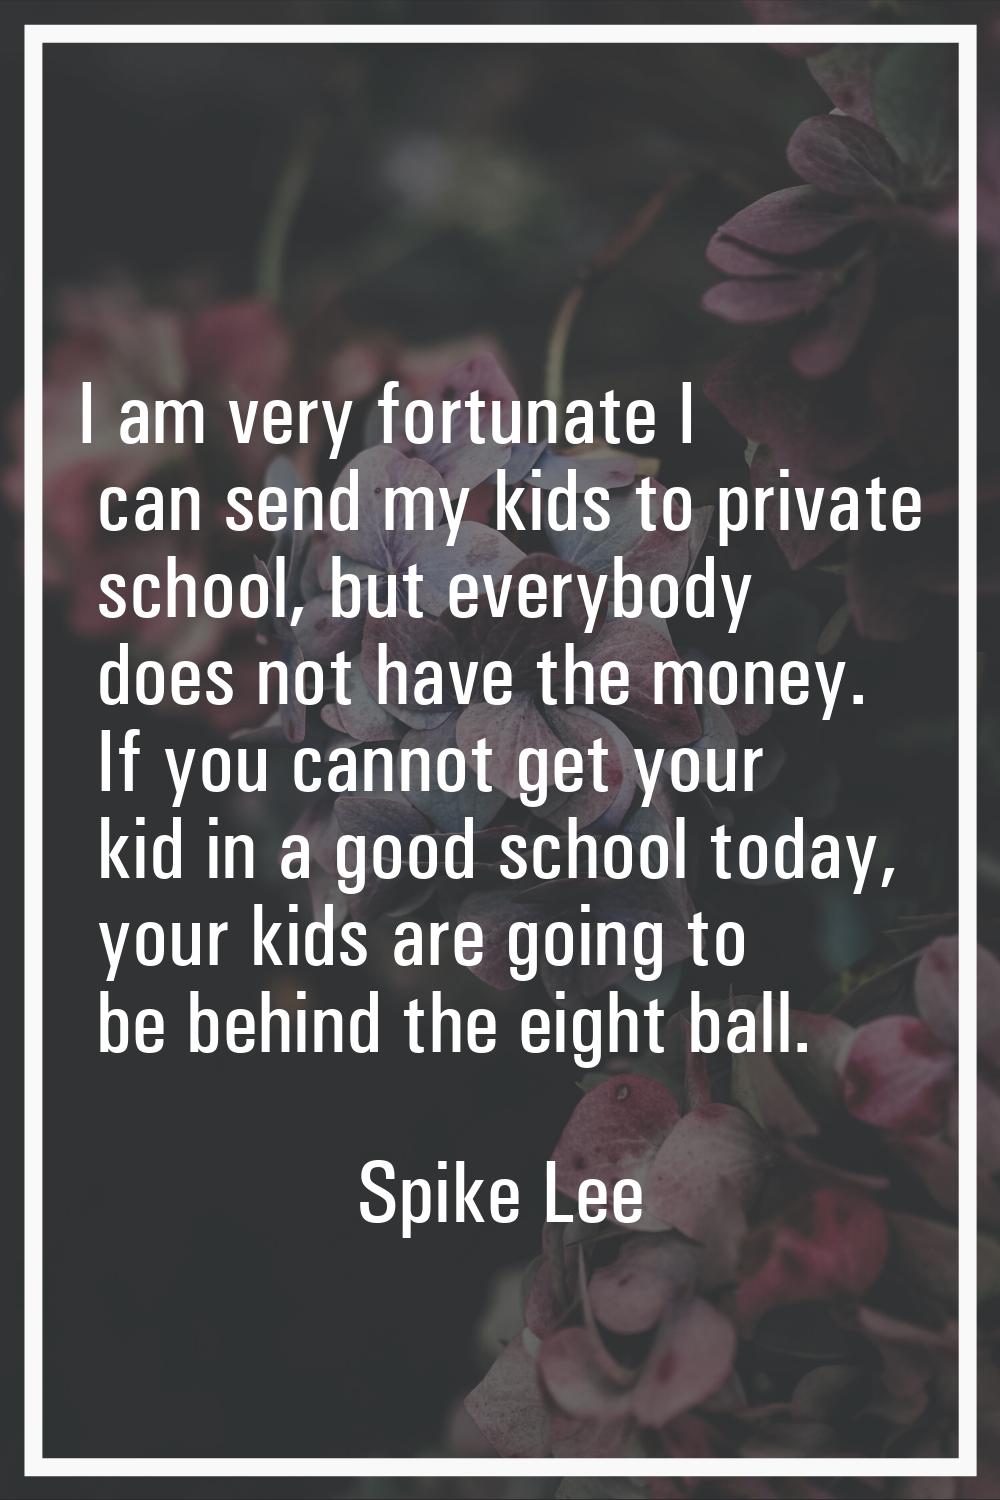 I am very fortunate I can send my kids to private school, but everybody does not have the money. If